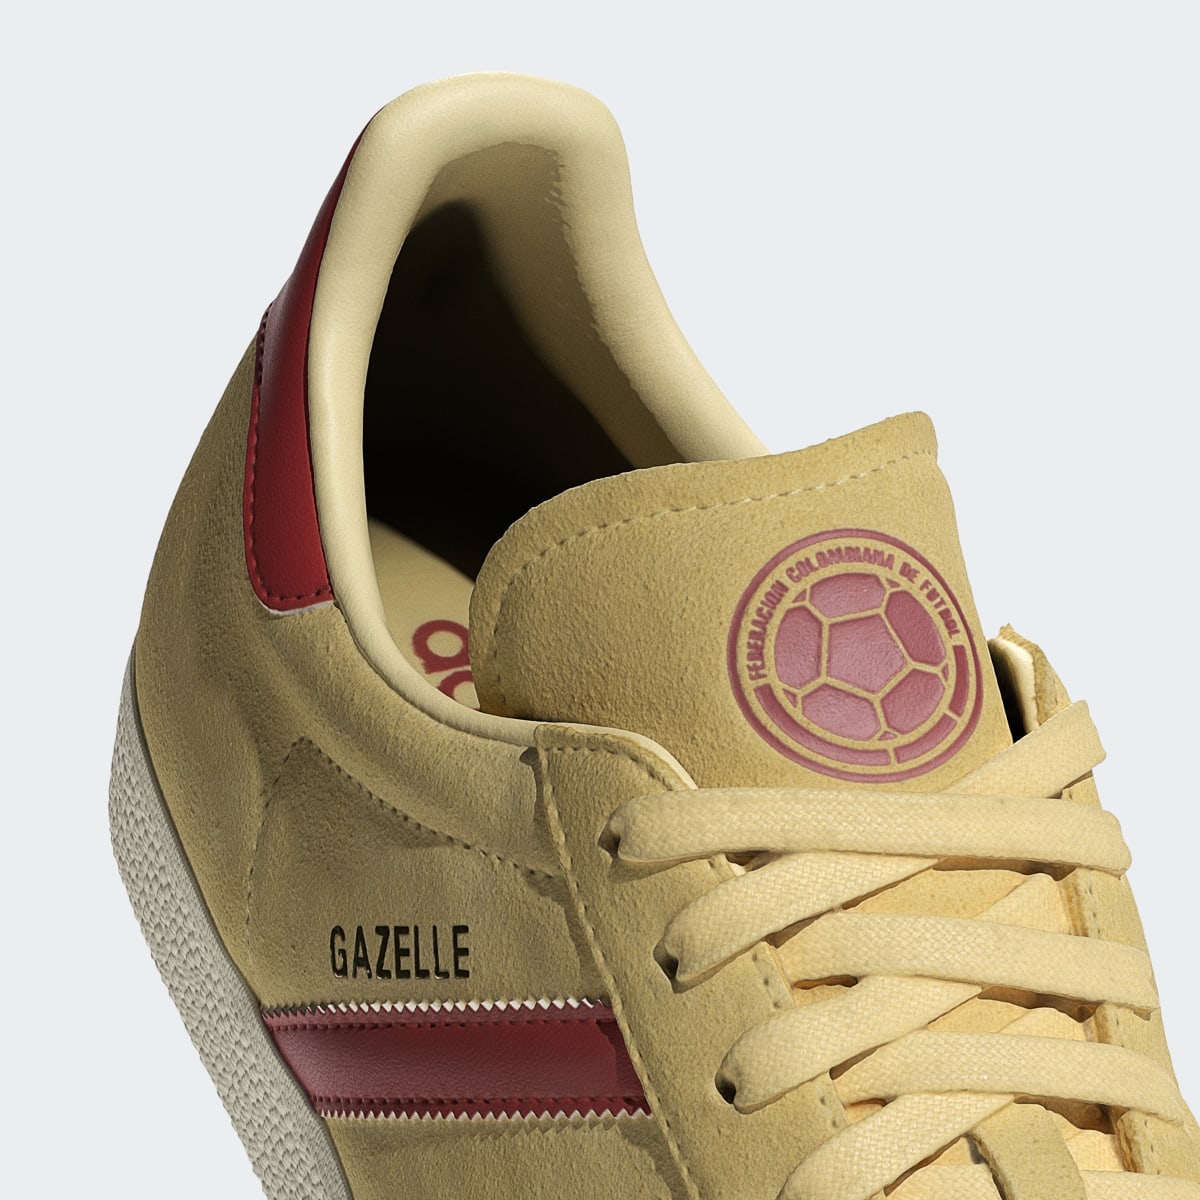 Adidas Gazelle Colombia Shoes. 8